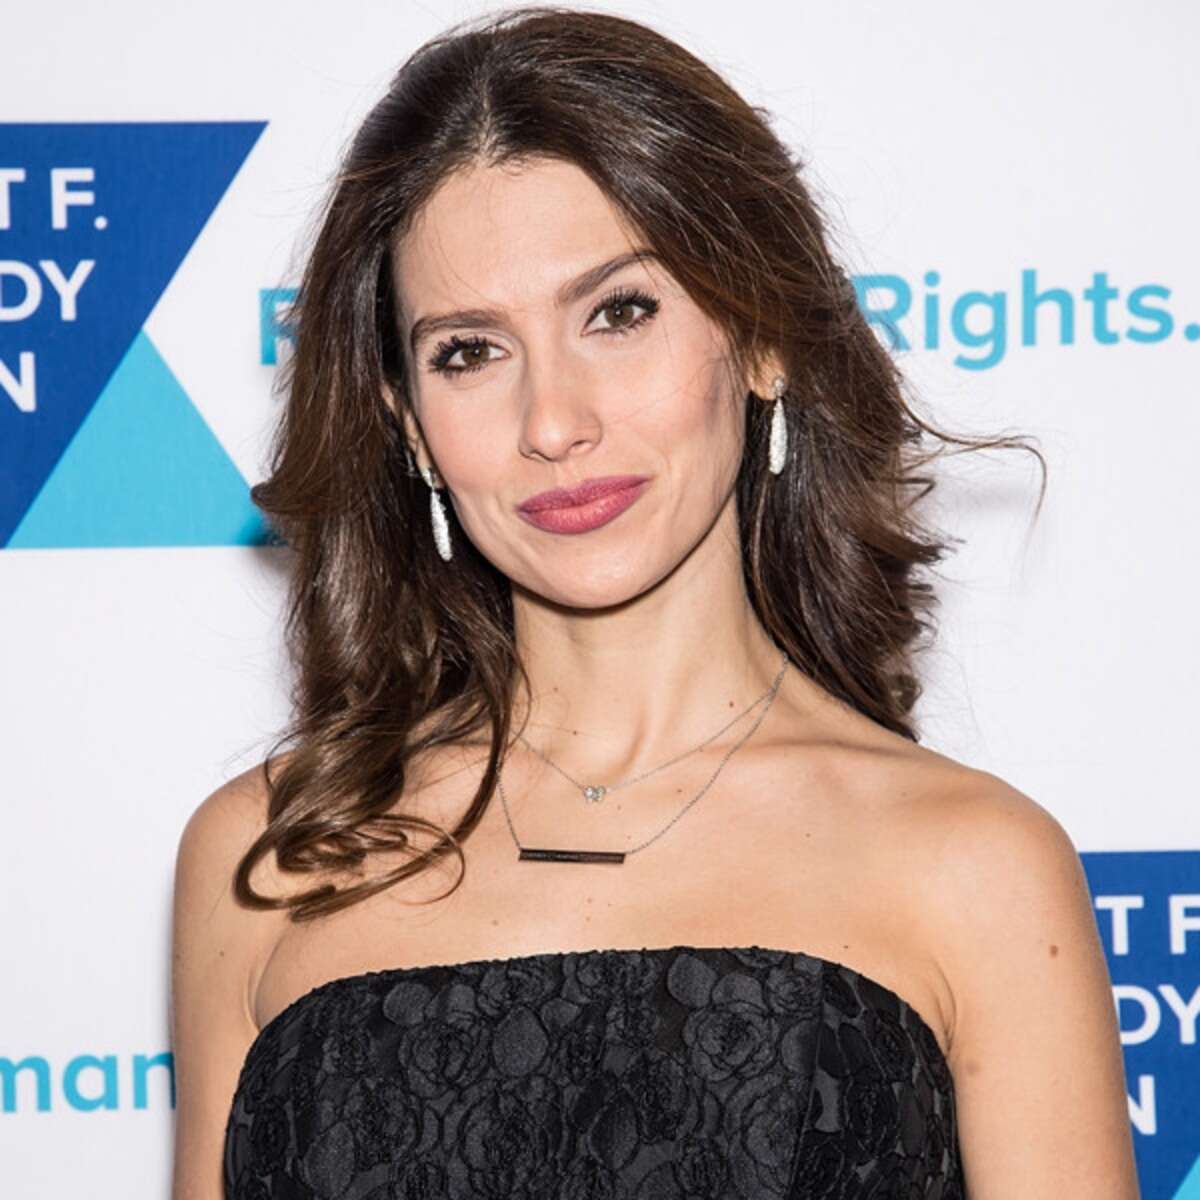 'Feeling better now', says Hilaria Baldwin to fans